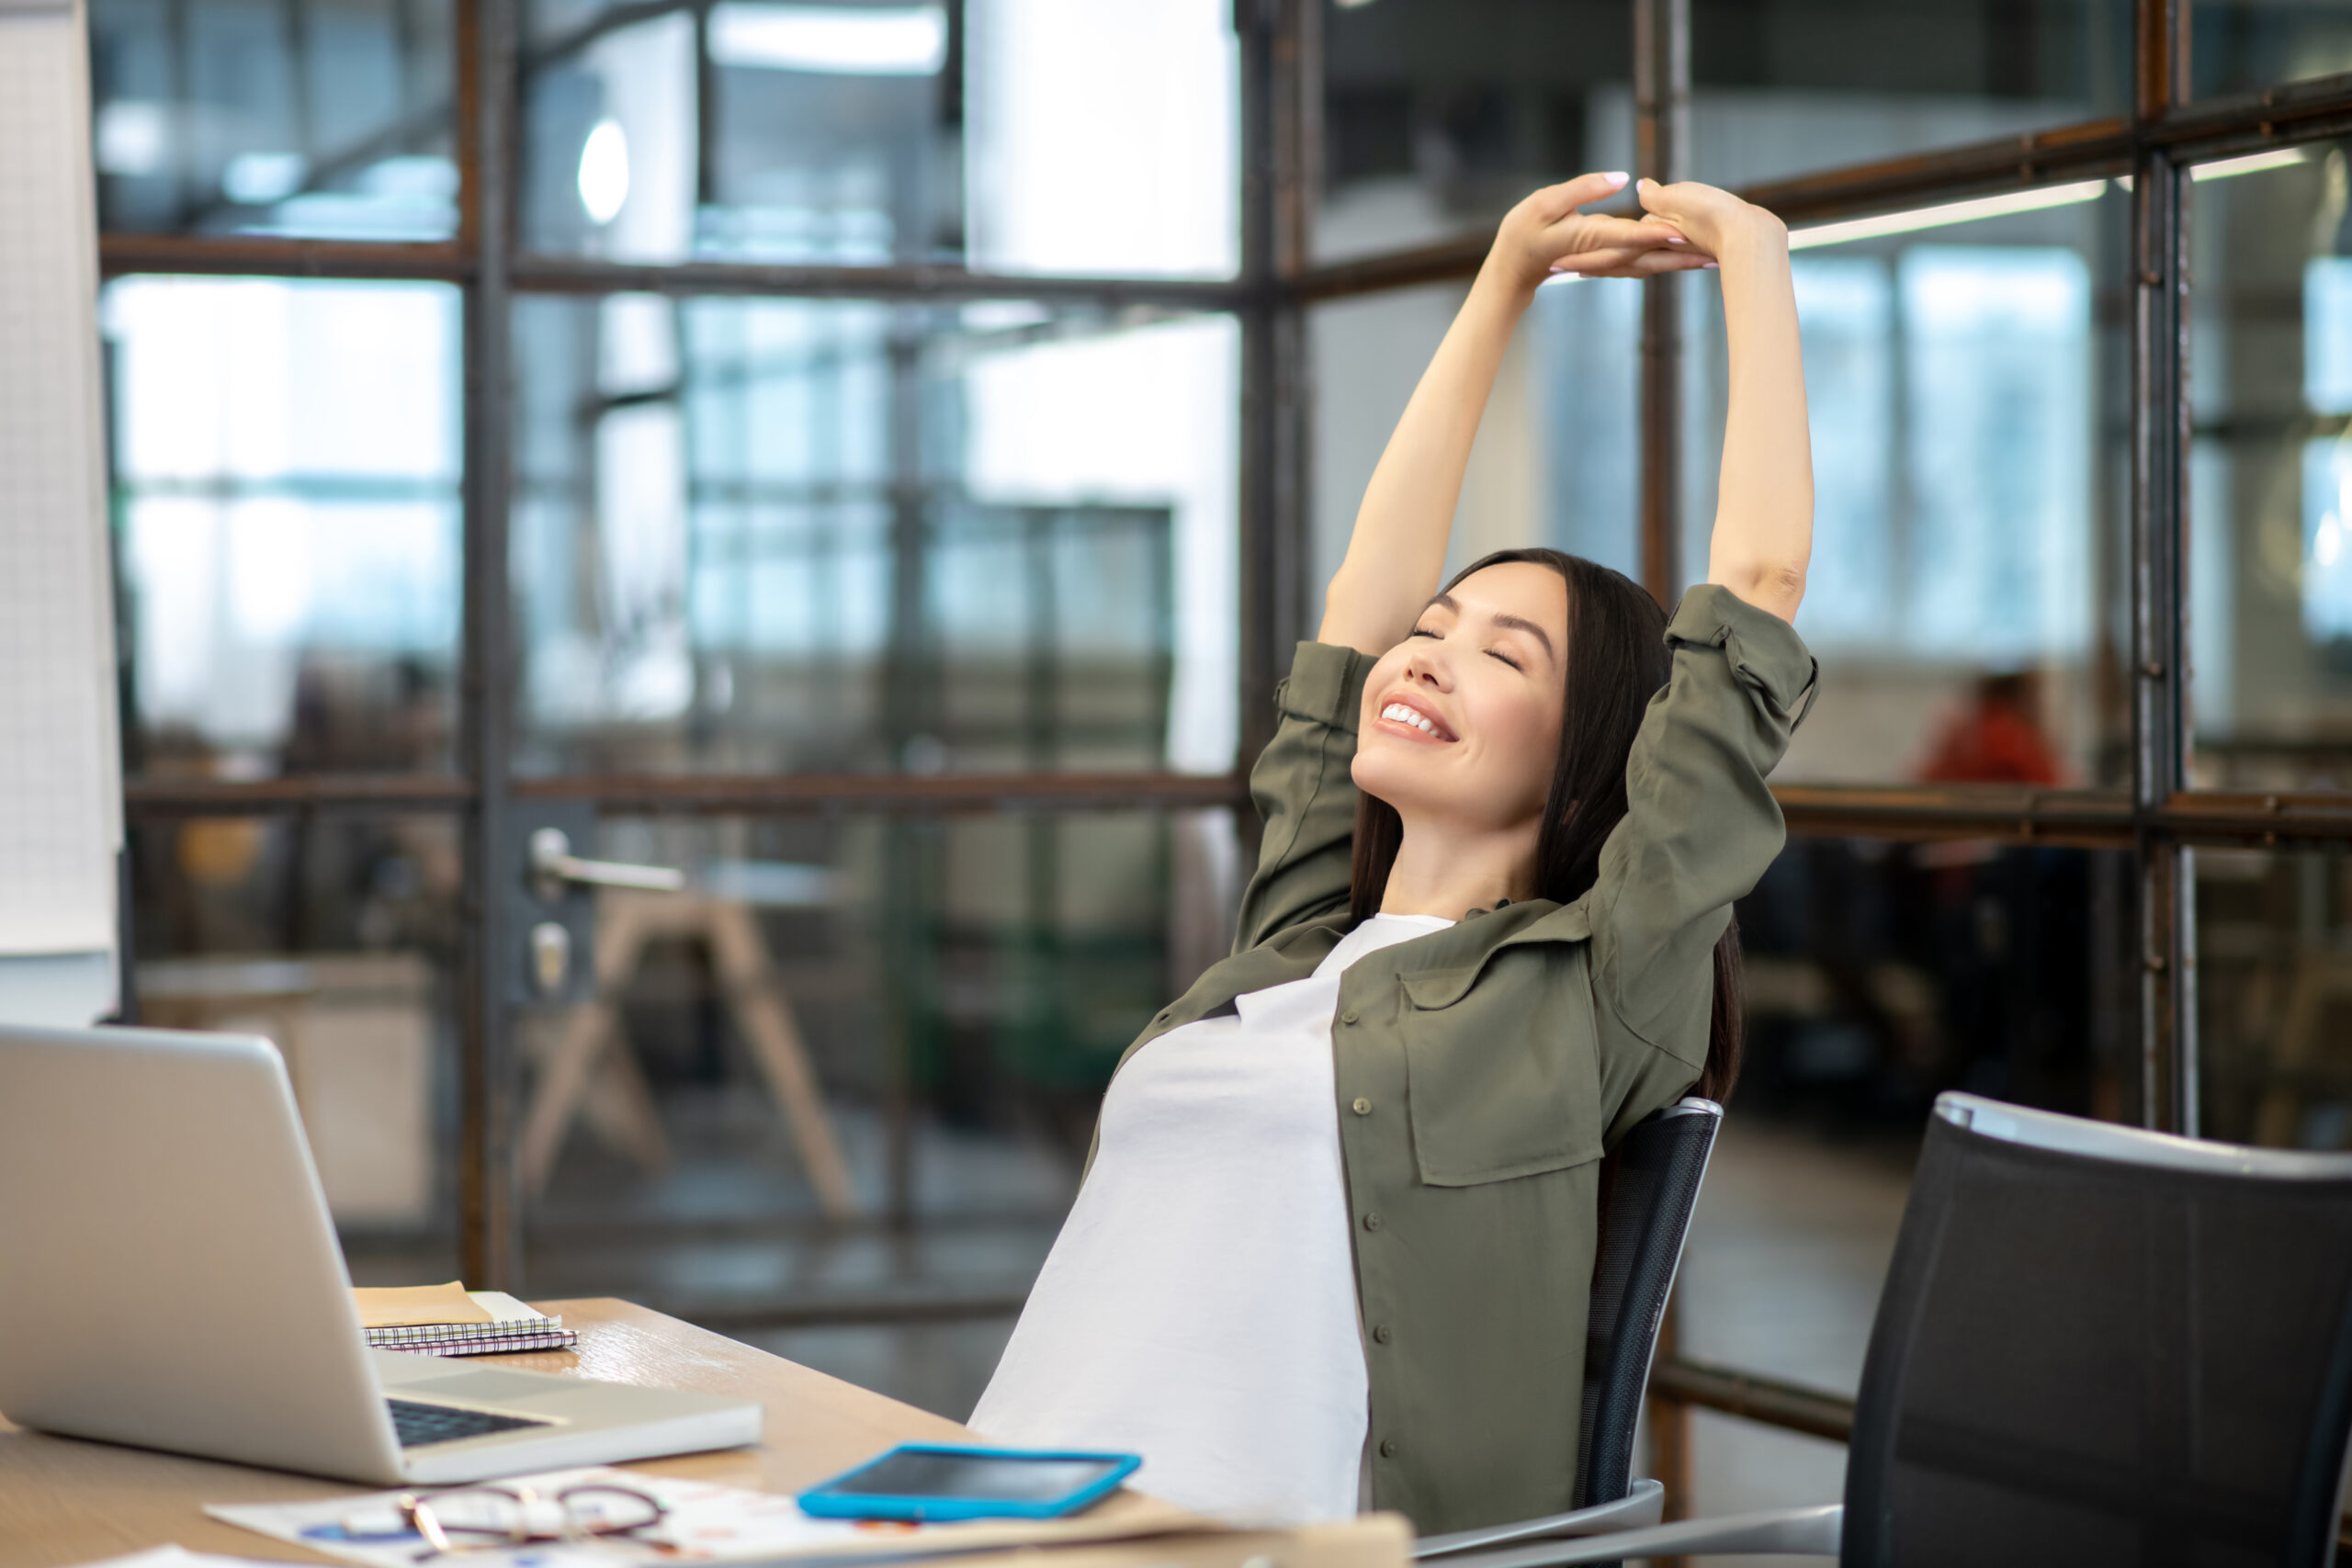 Woman stretching, promoting physical well-being